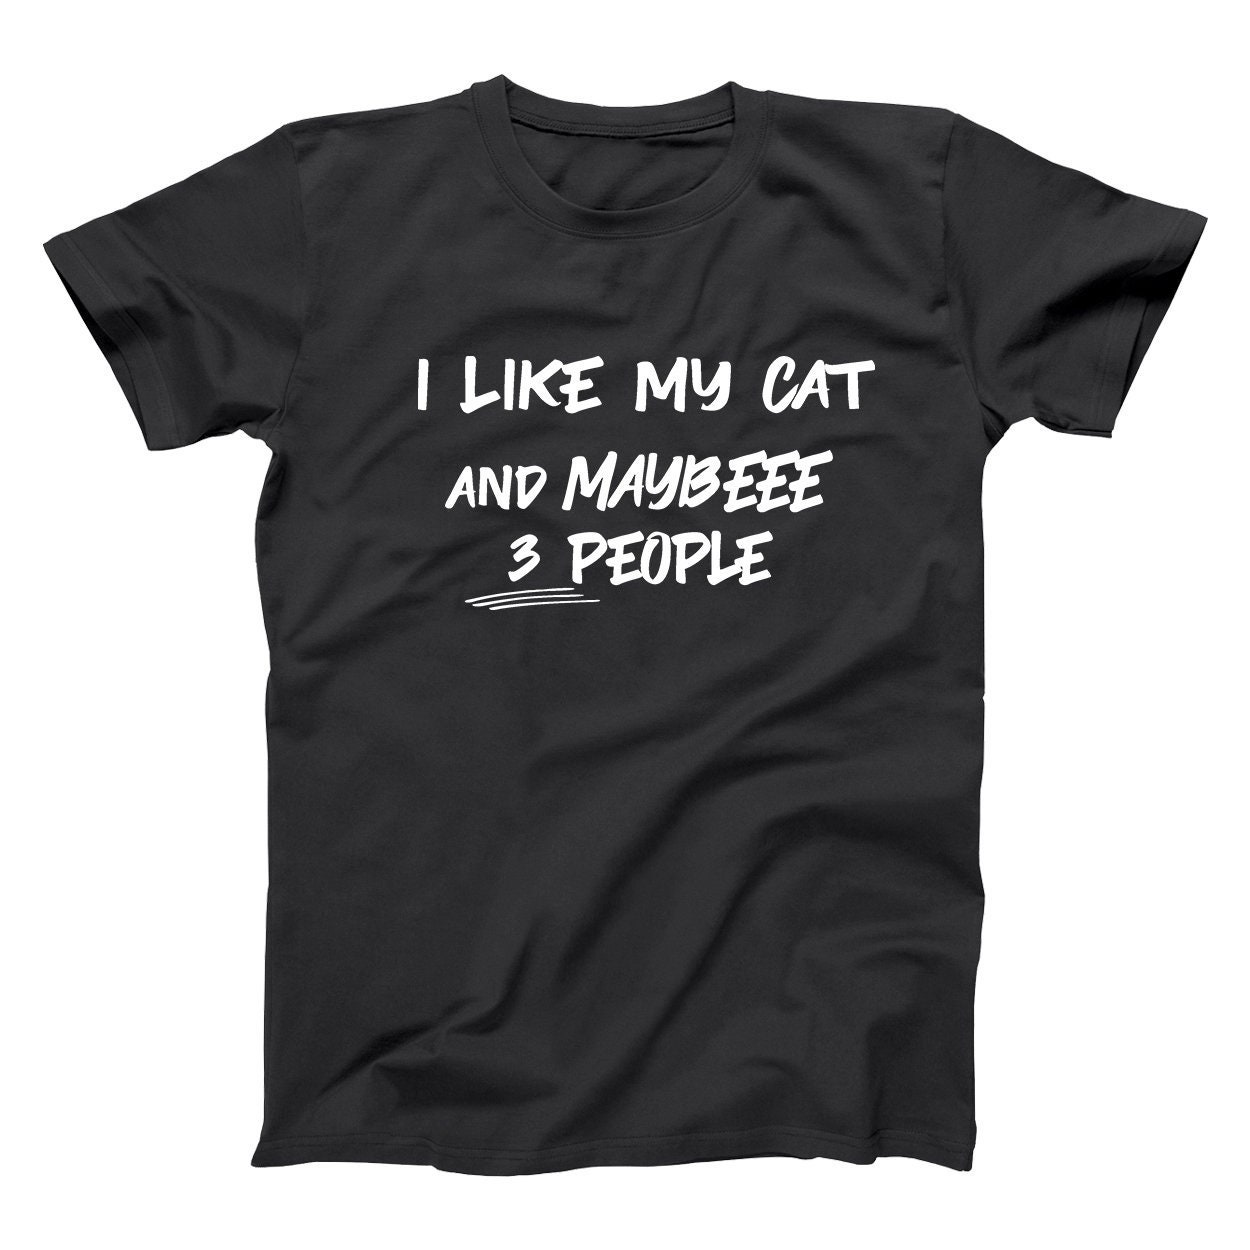 I Like My Cat and Maybe 3 People funny kitten cat pet lover | Etsy